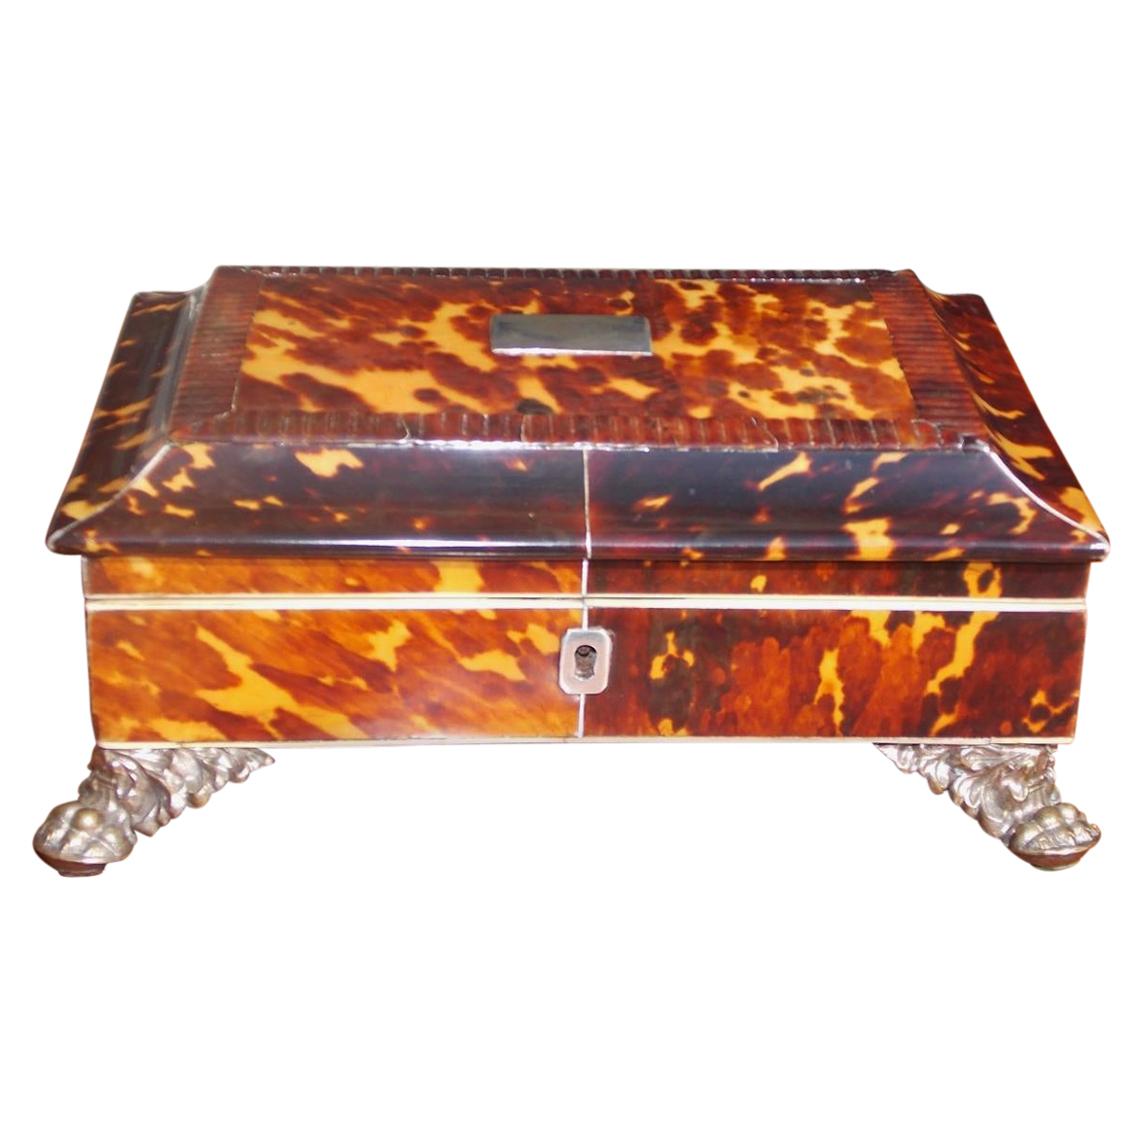 English Georgian Tortoise Shell Sewing Box with Silver Winged Paw Feet, C. 1810